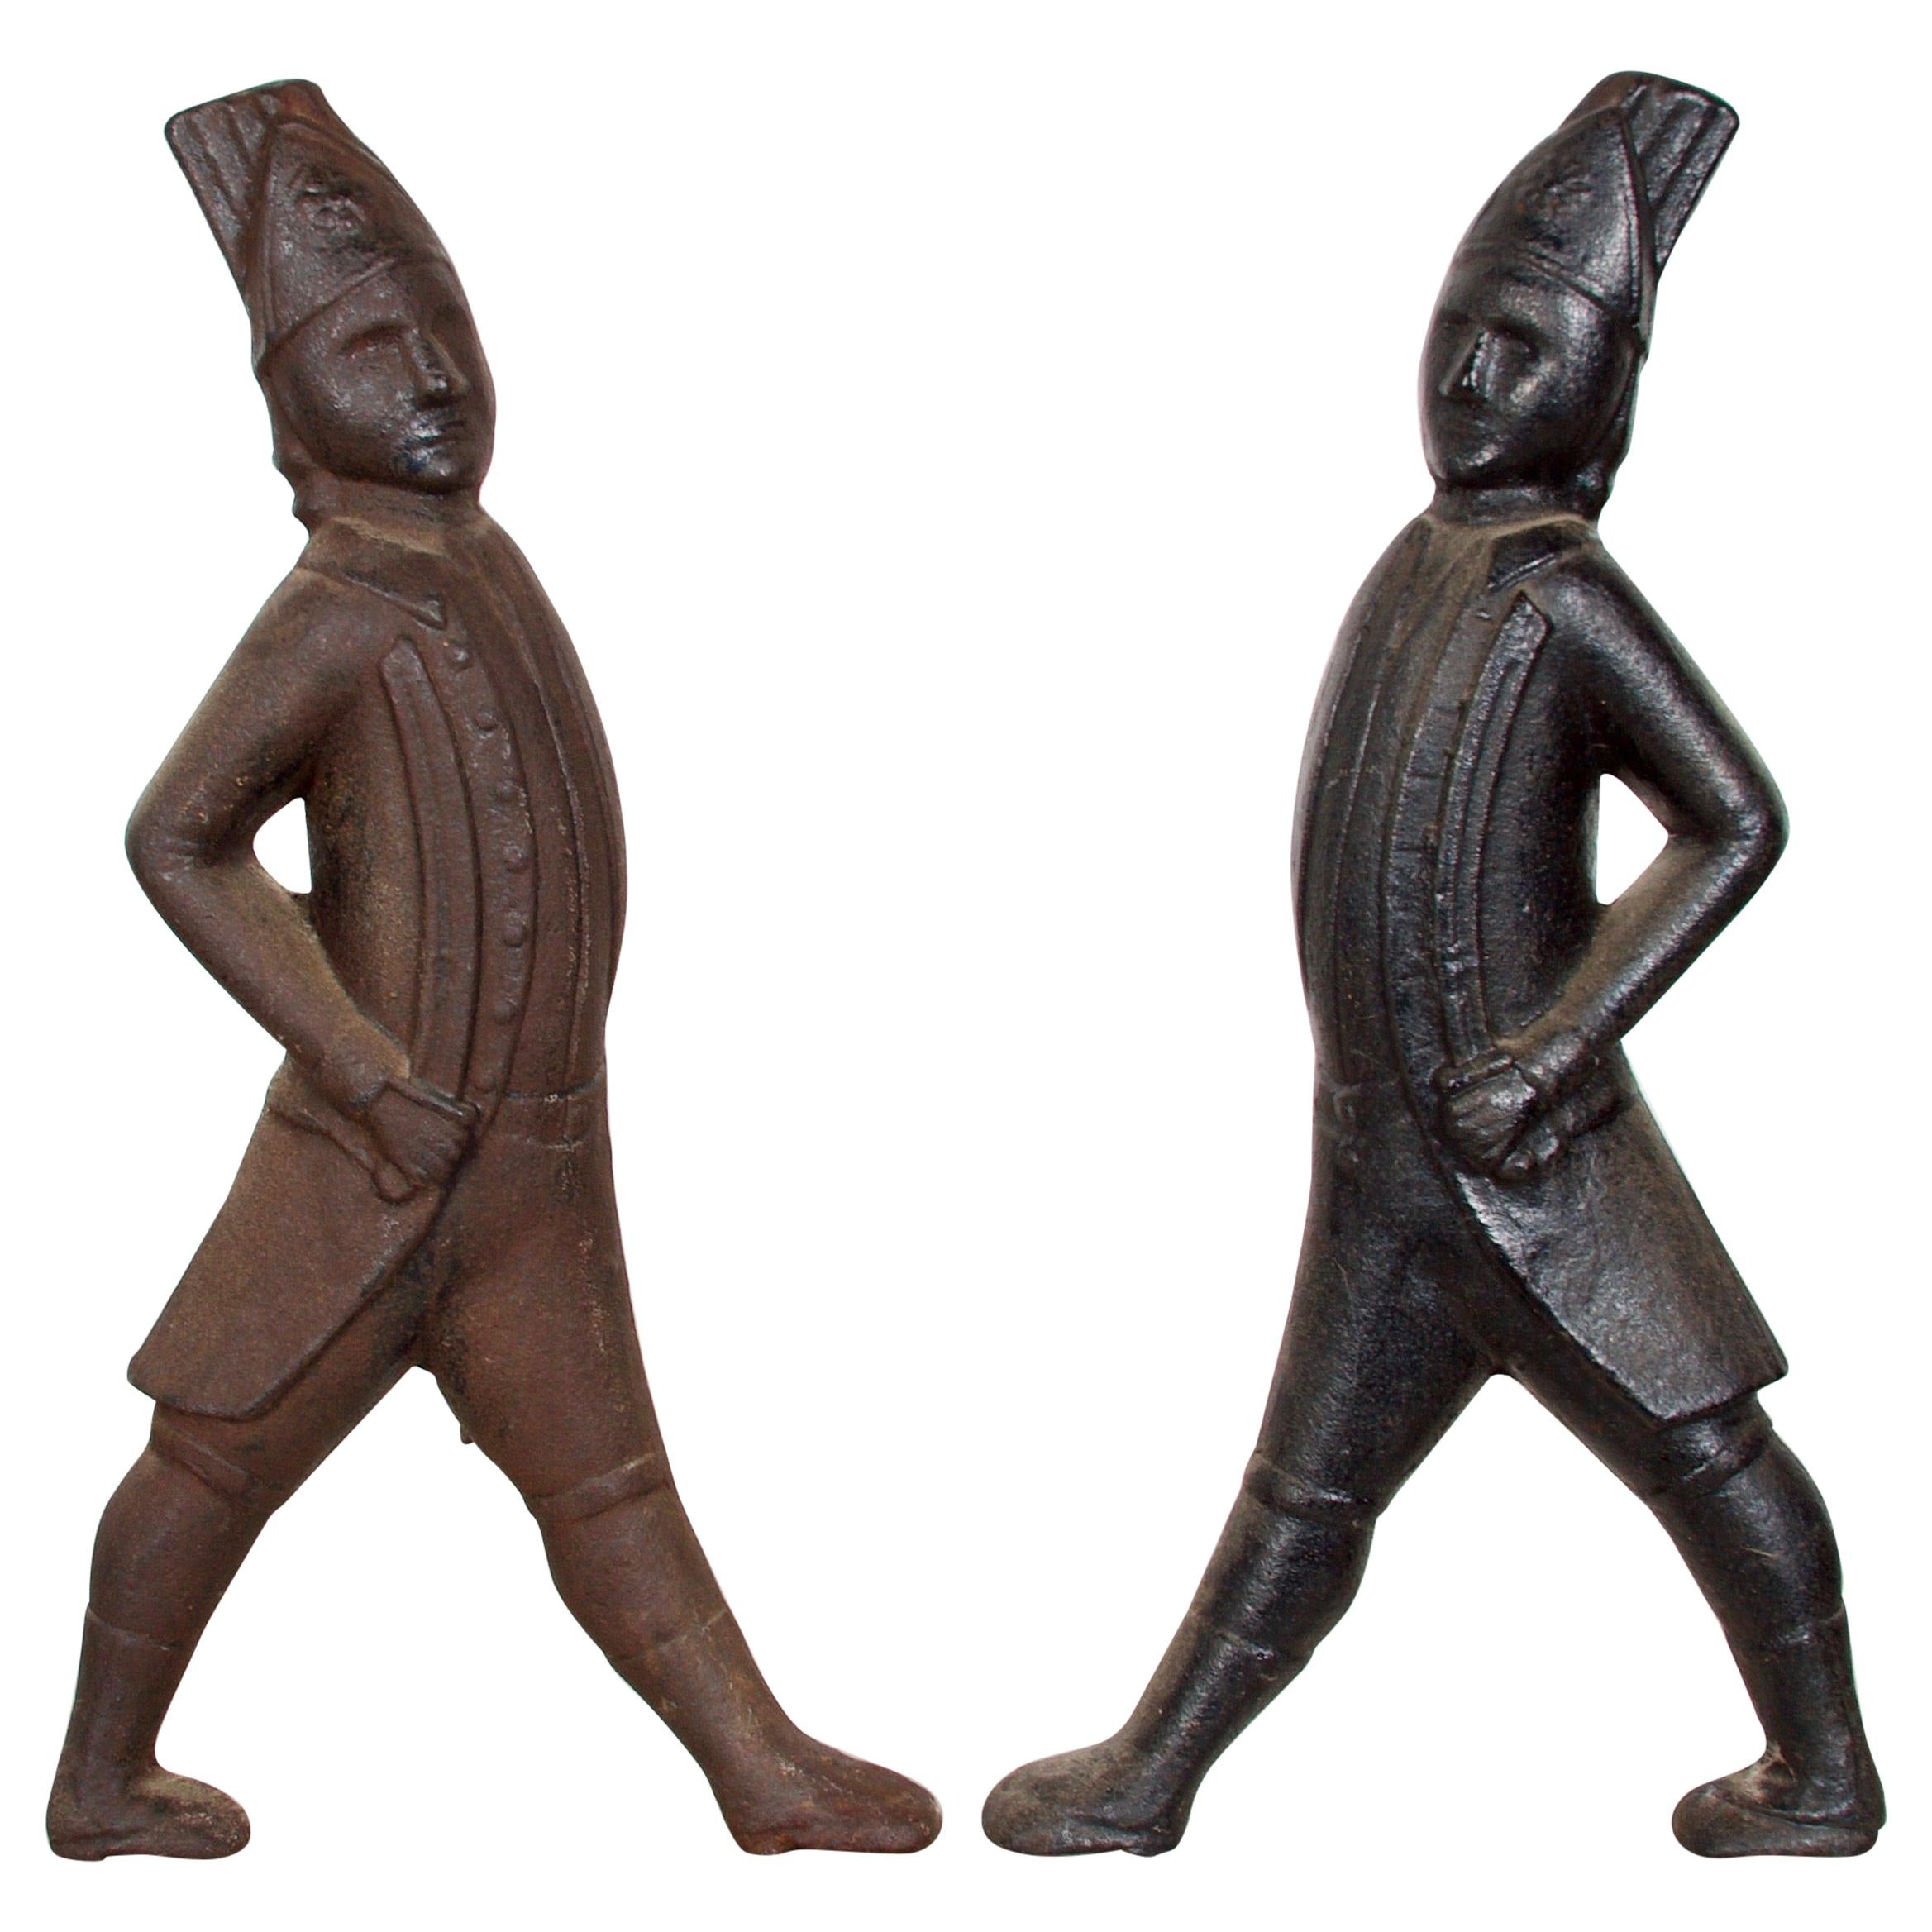 Pair of Cast Iron, Finely Detailed Hessian Soldiers, Late 19th Century